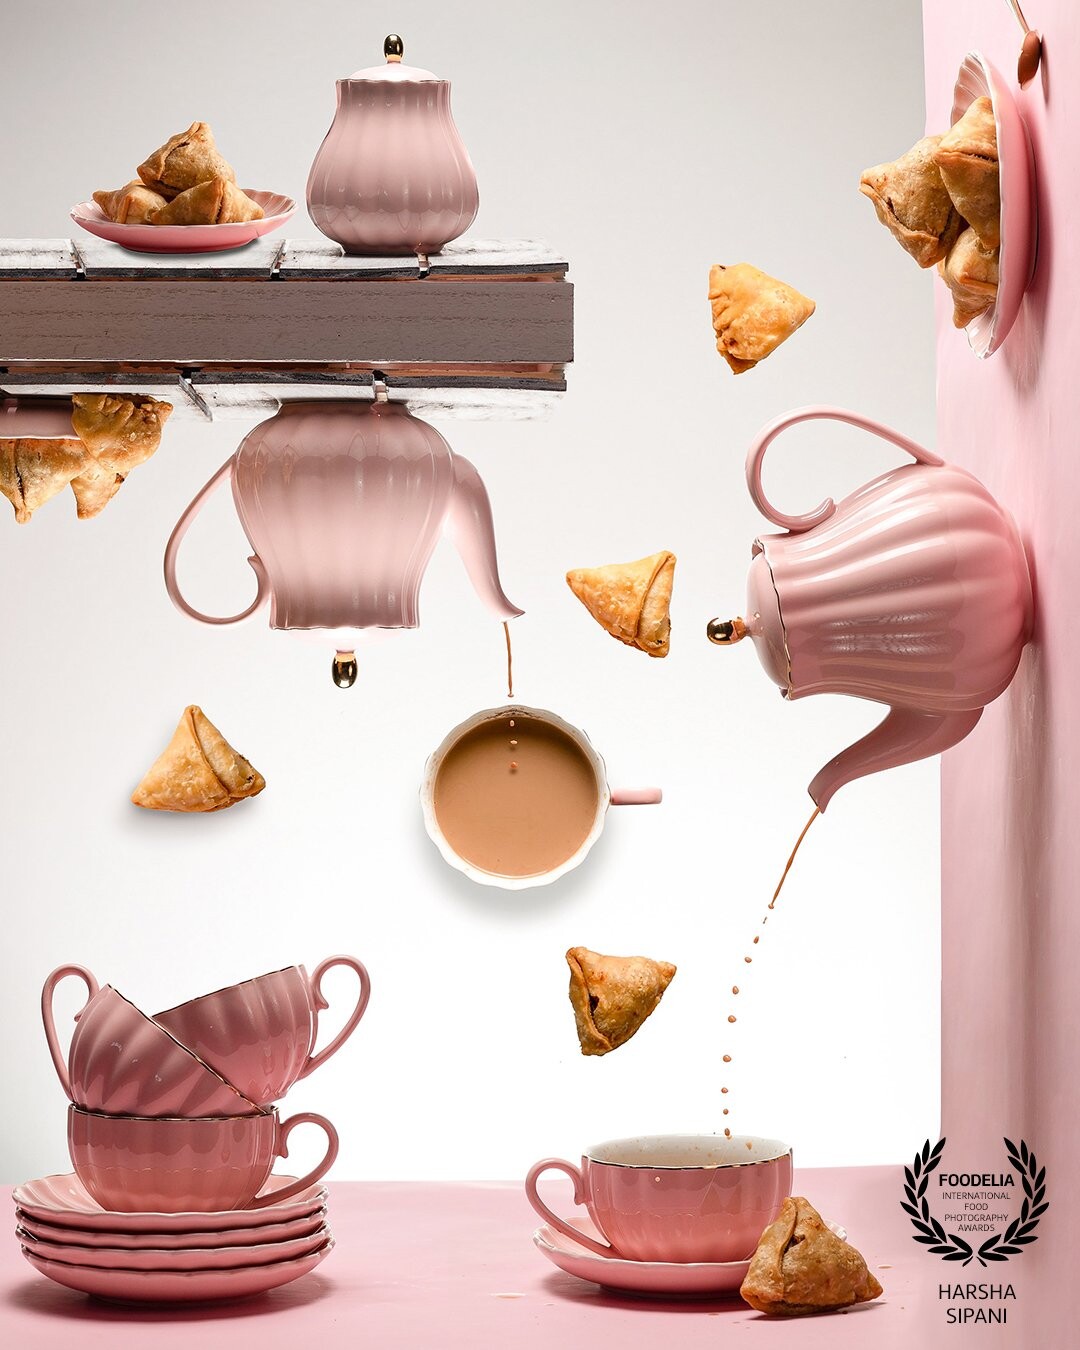 Chai & Samosa (A classic combination)<br />
This time I tried to compose 3 different styles in one frame<br />
Food on the wall<br />
Upside down<br />
Flatlay<br />
For the next composition what would you like to try?